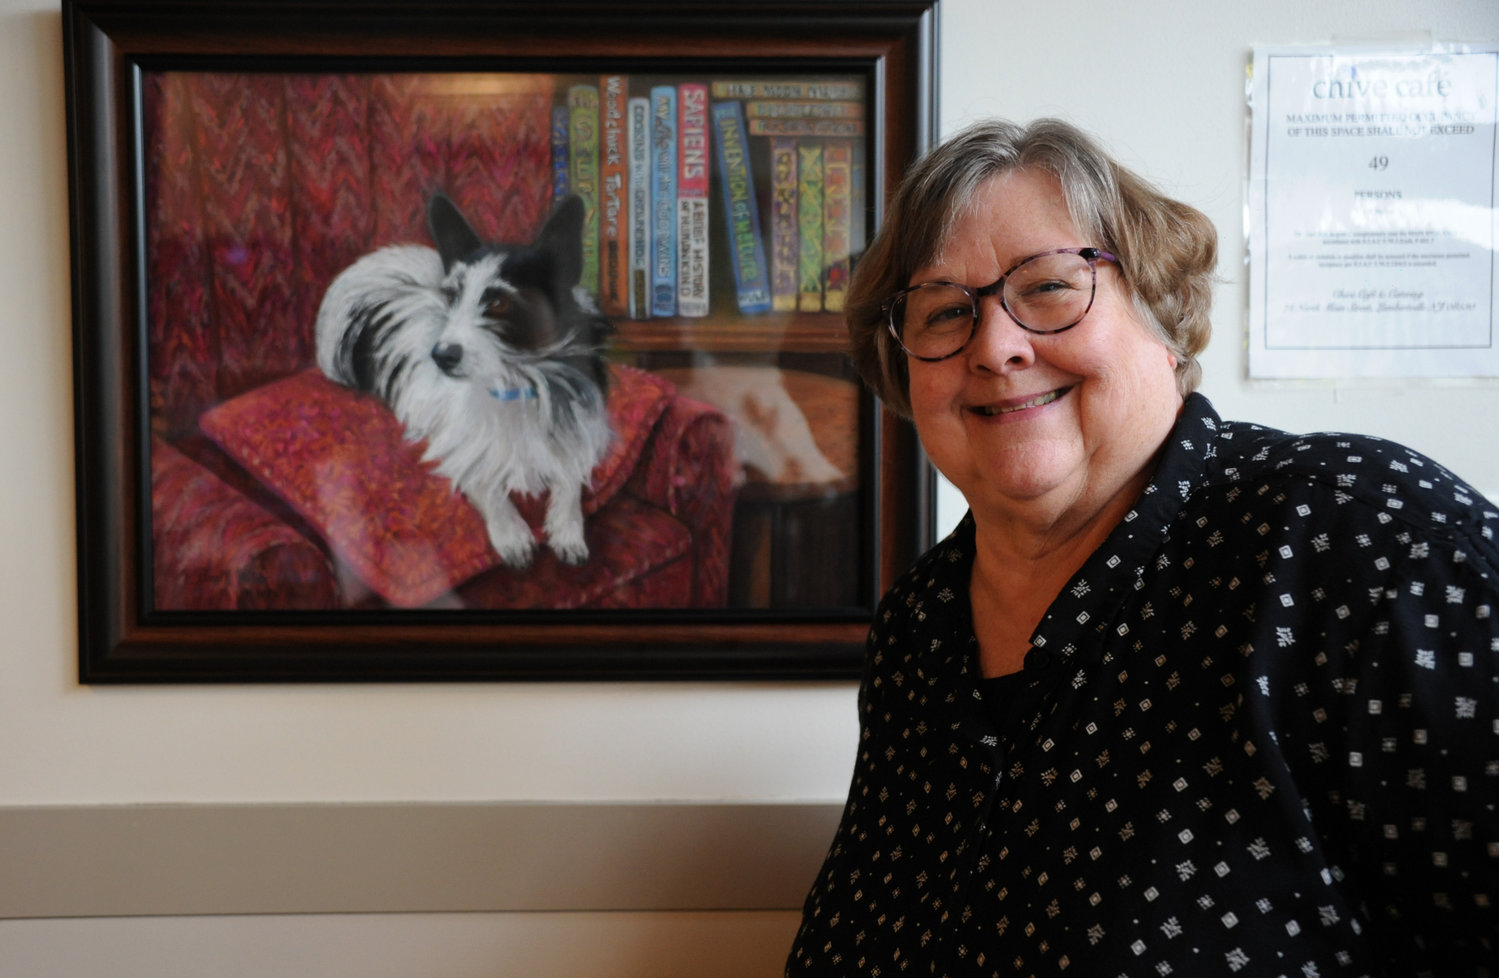 The group’s instructor Pam Miller next to her painting of Badger, “A Scholar and a Gentleman.”